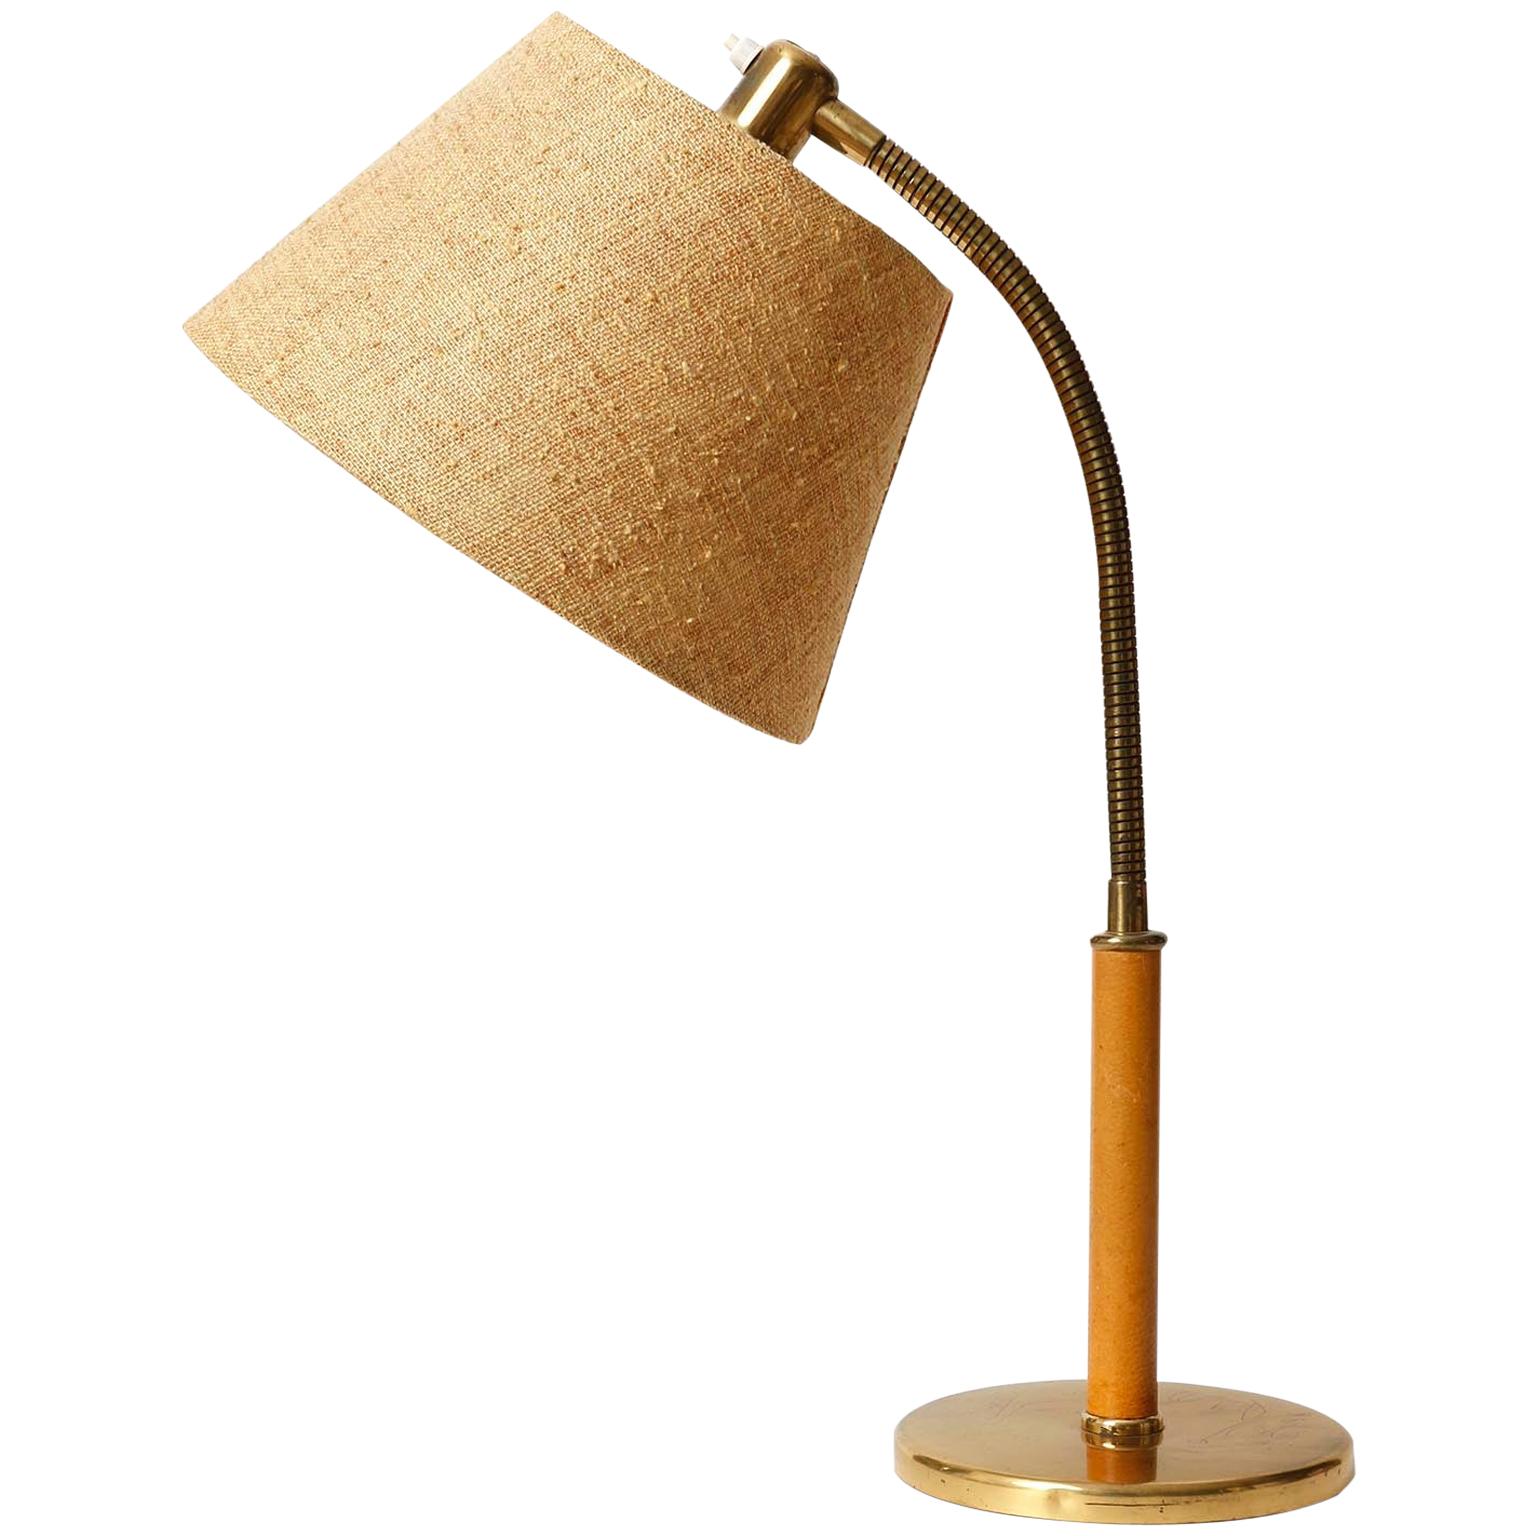 Josef Frank Table Lamp 'Tisch-Überall' Mod. 1092 by Kalmar, Brass Leather, 1950s For Sale